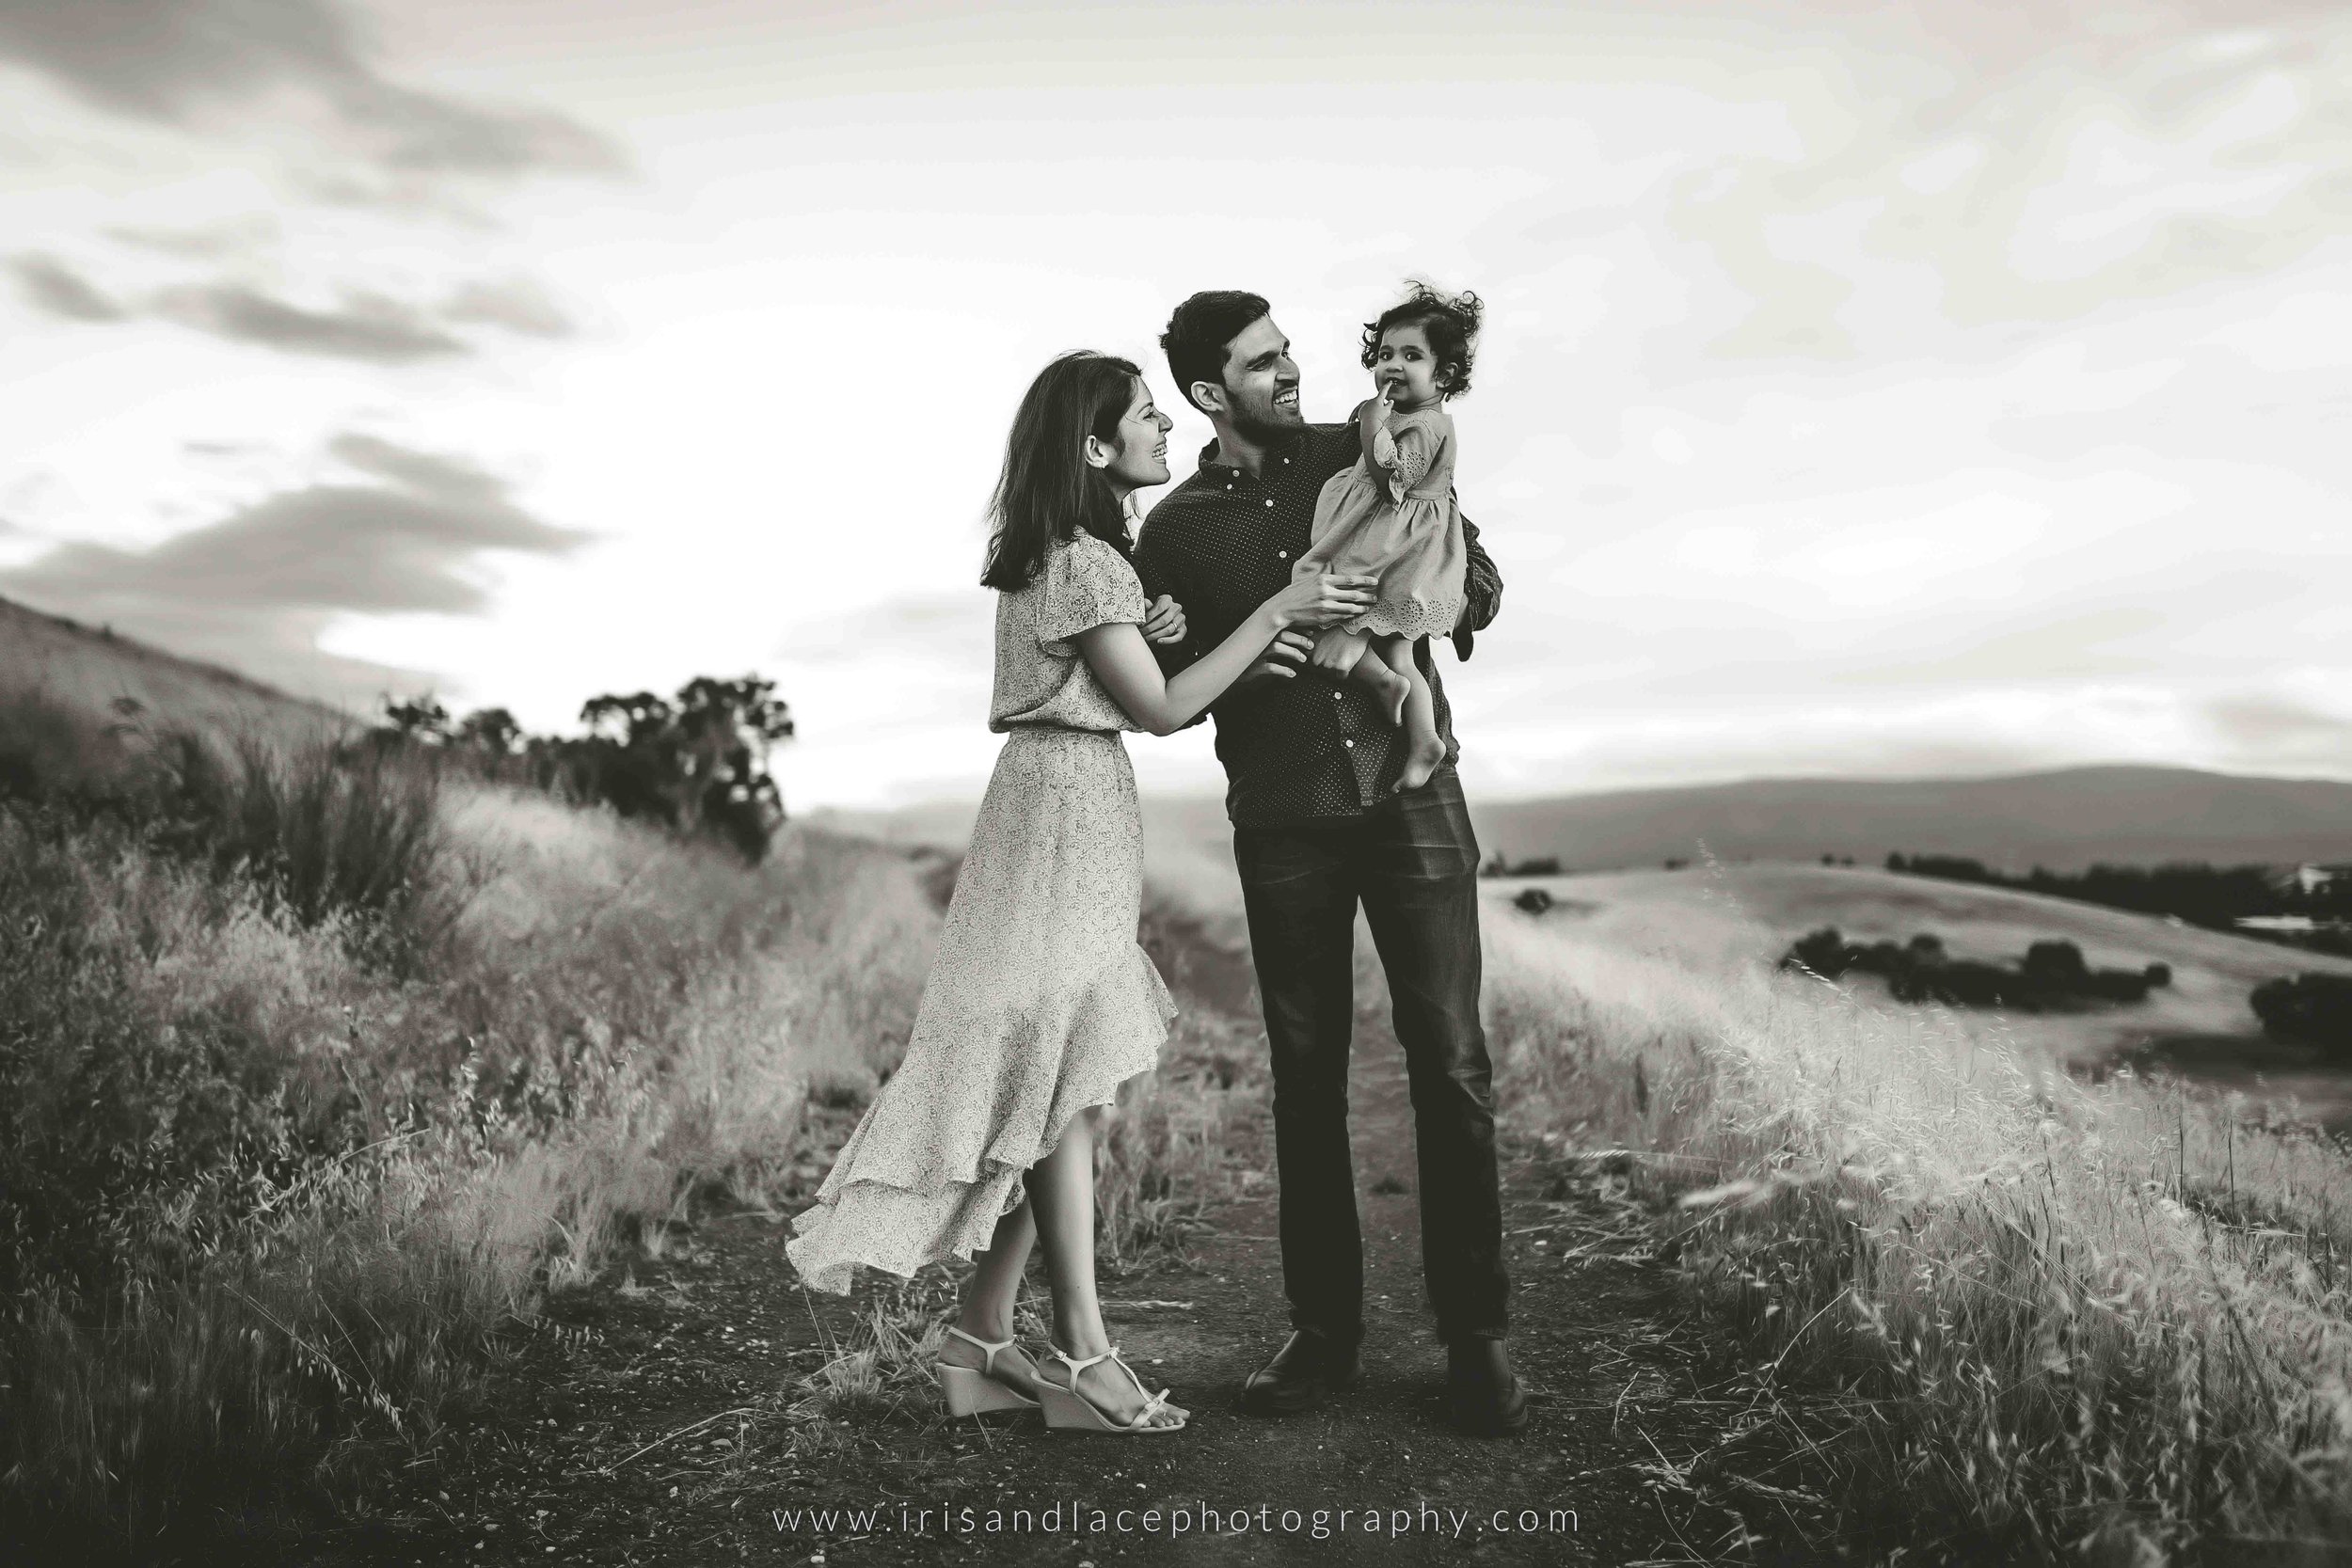 Mountain View family photography  at Shoreline Park  |  Iris and Lace Photography